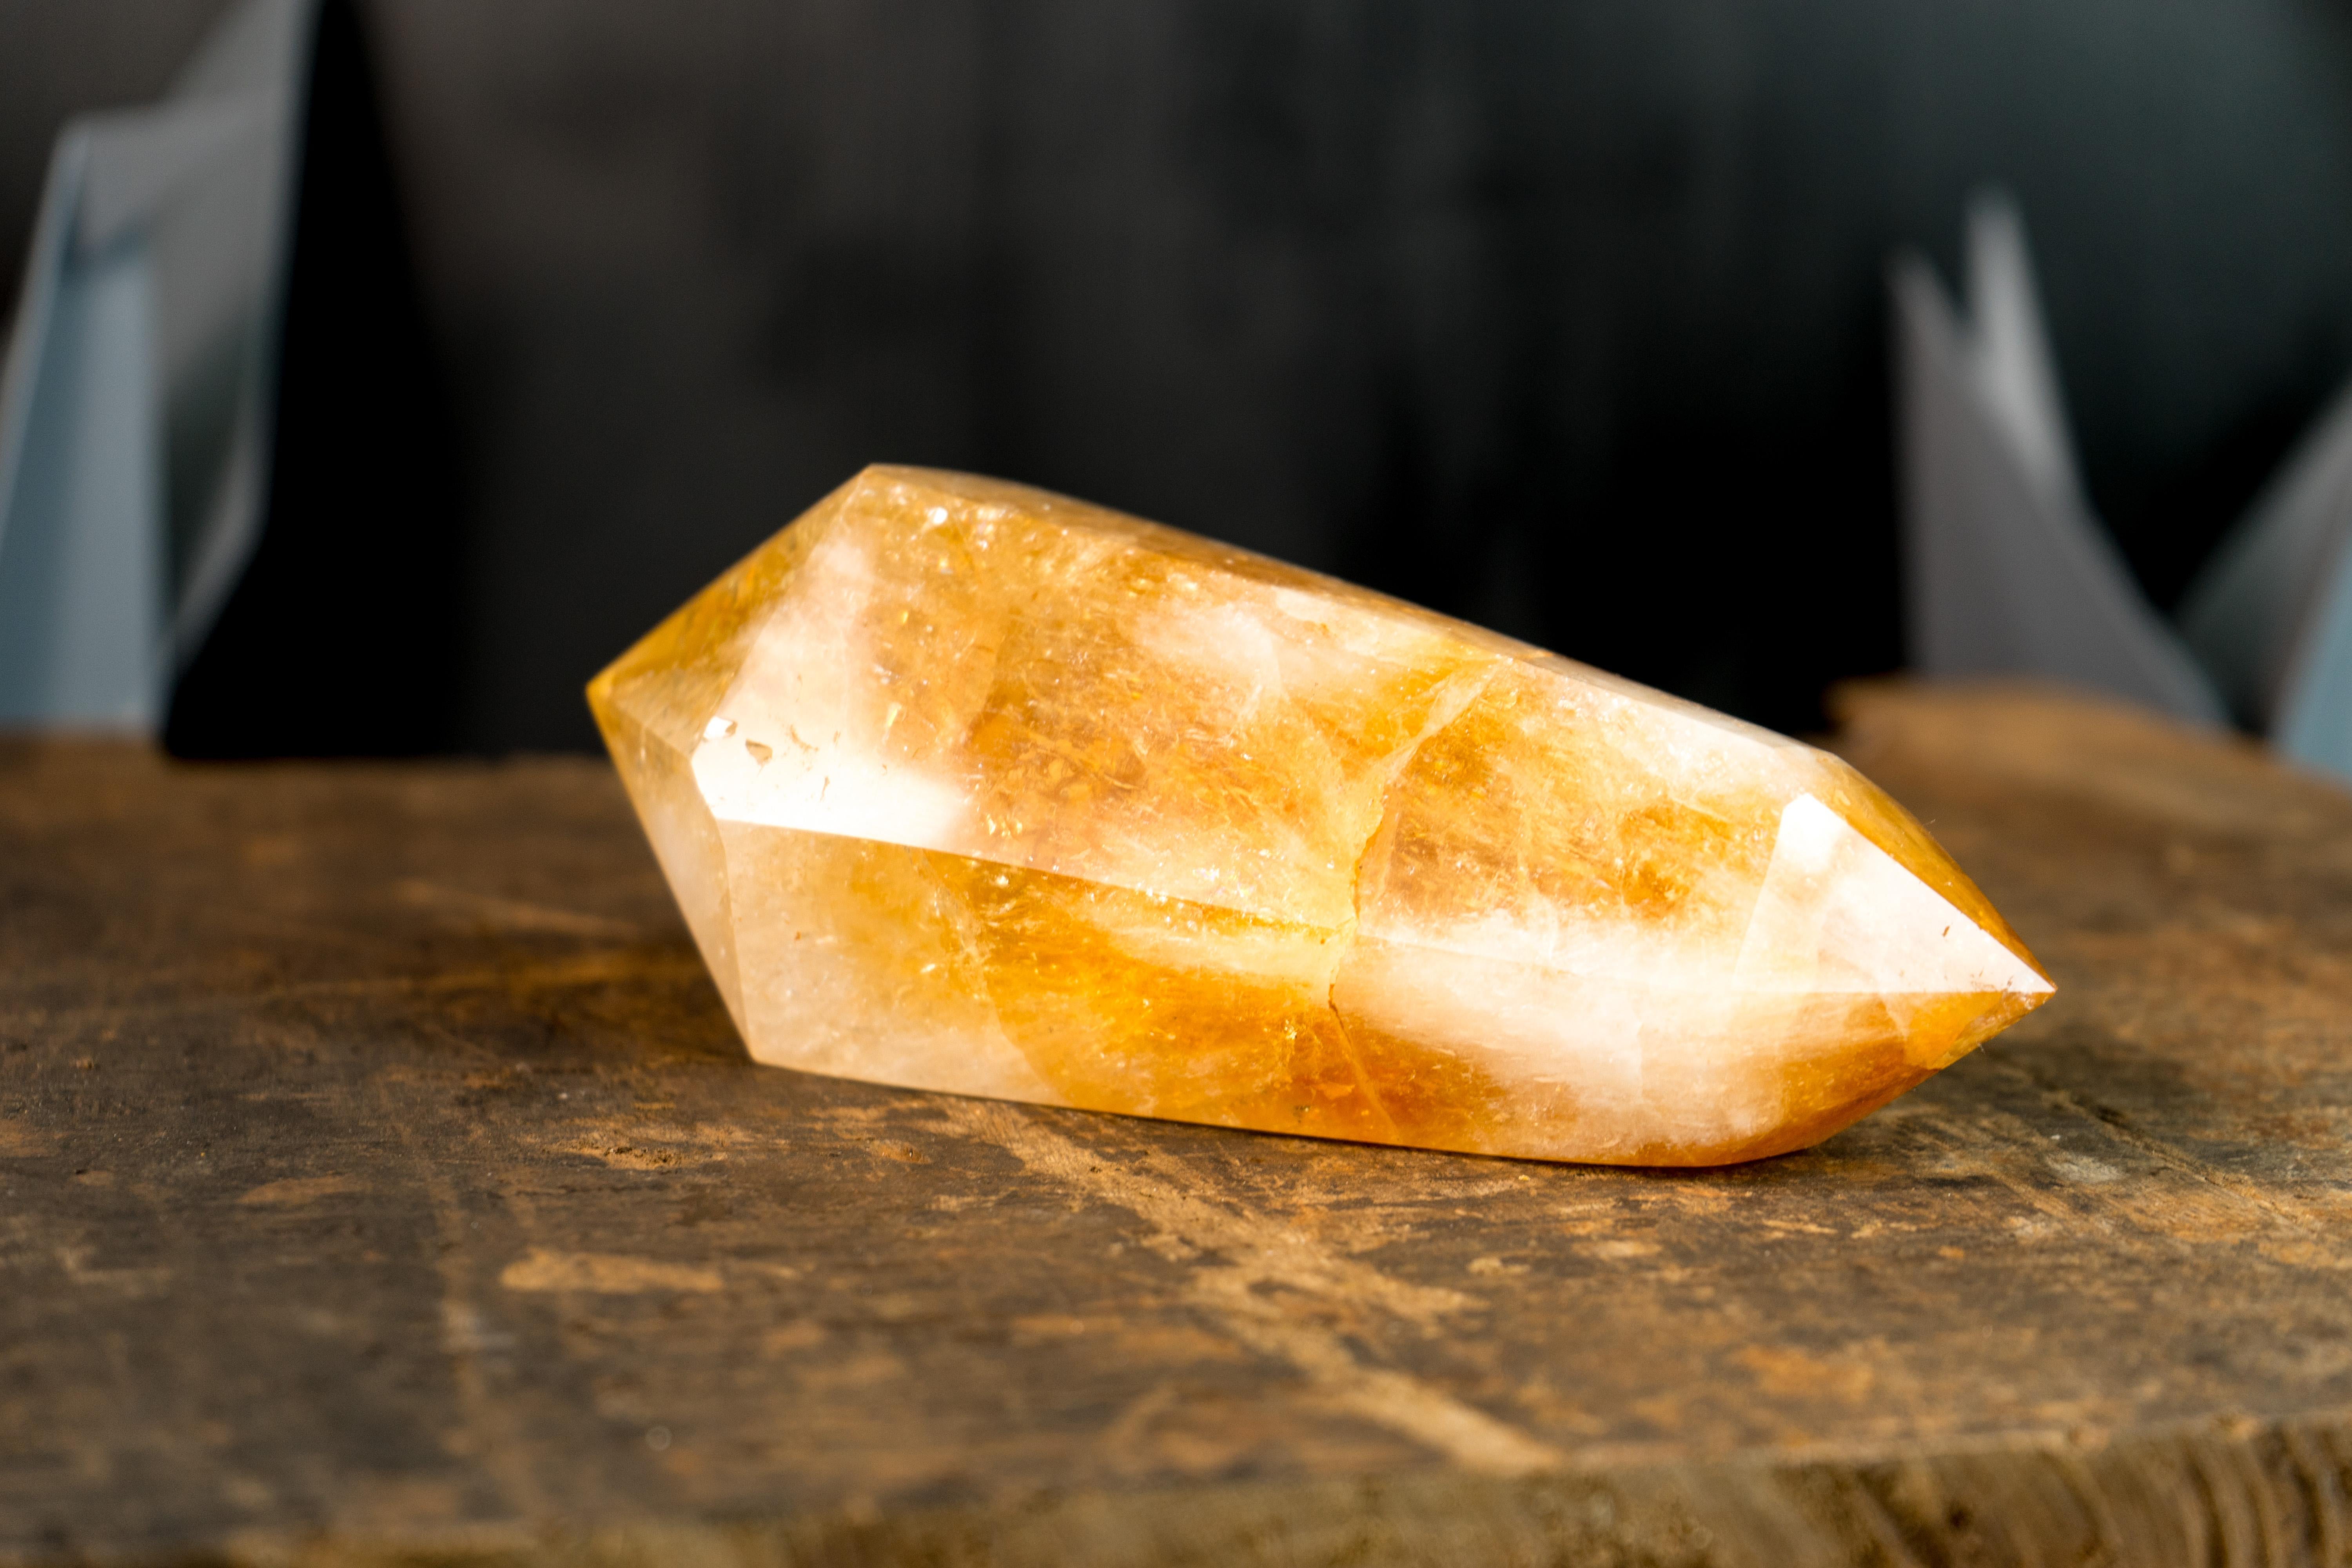 A gorgeous, large, double-terminated Brazilian Citrine point that brings a fabulous deep orange citrine color, which is characteristic of high-grade citrines. This is formed in an XL-size specimen, rarely seen in Citrines from South Brazil. The